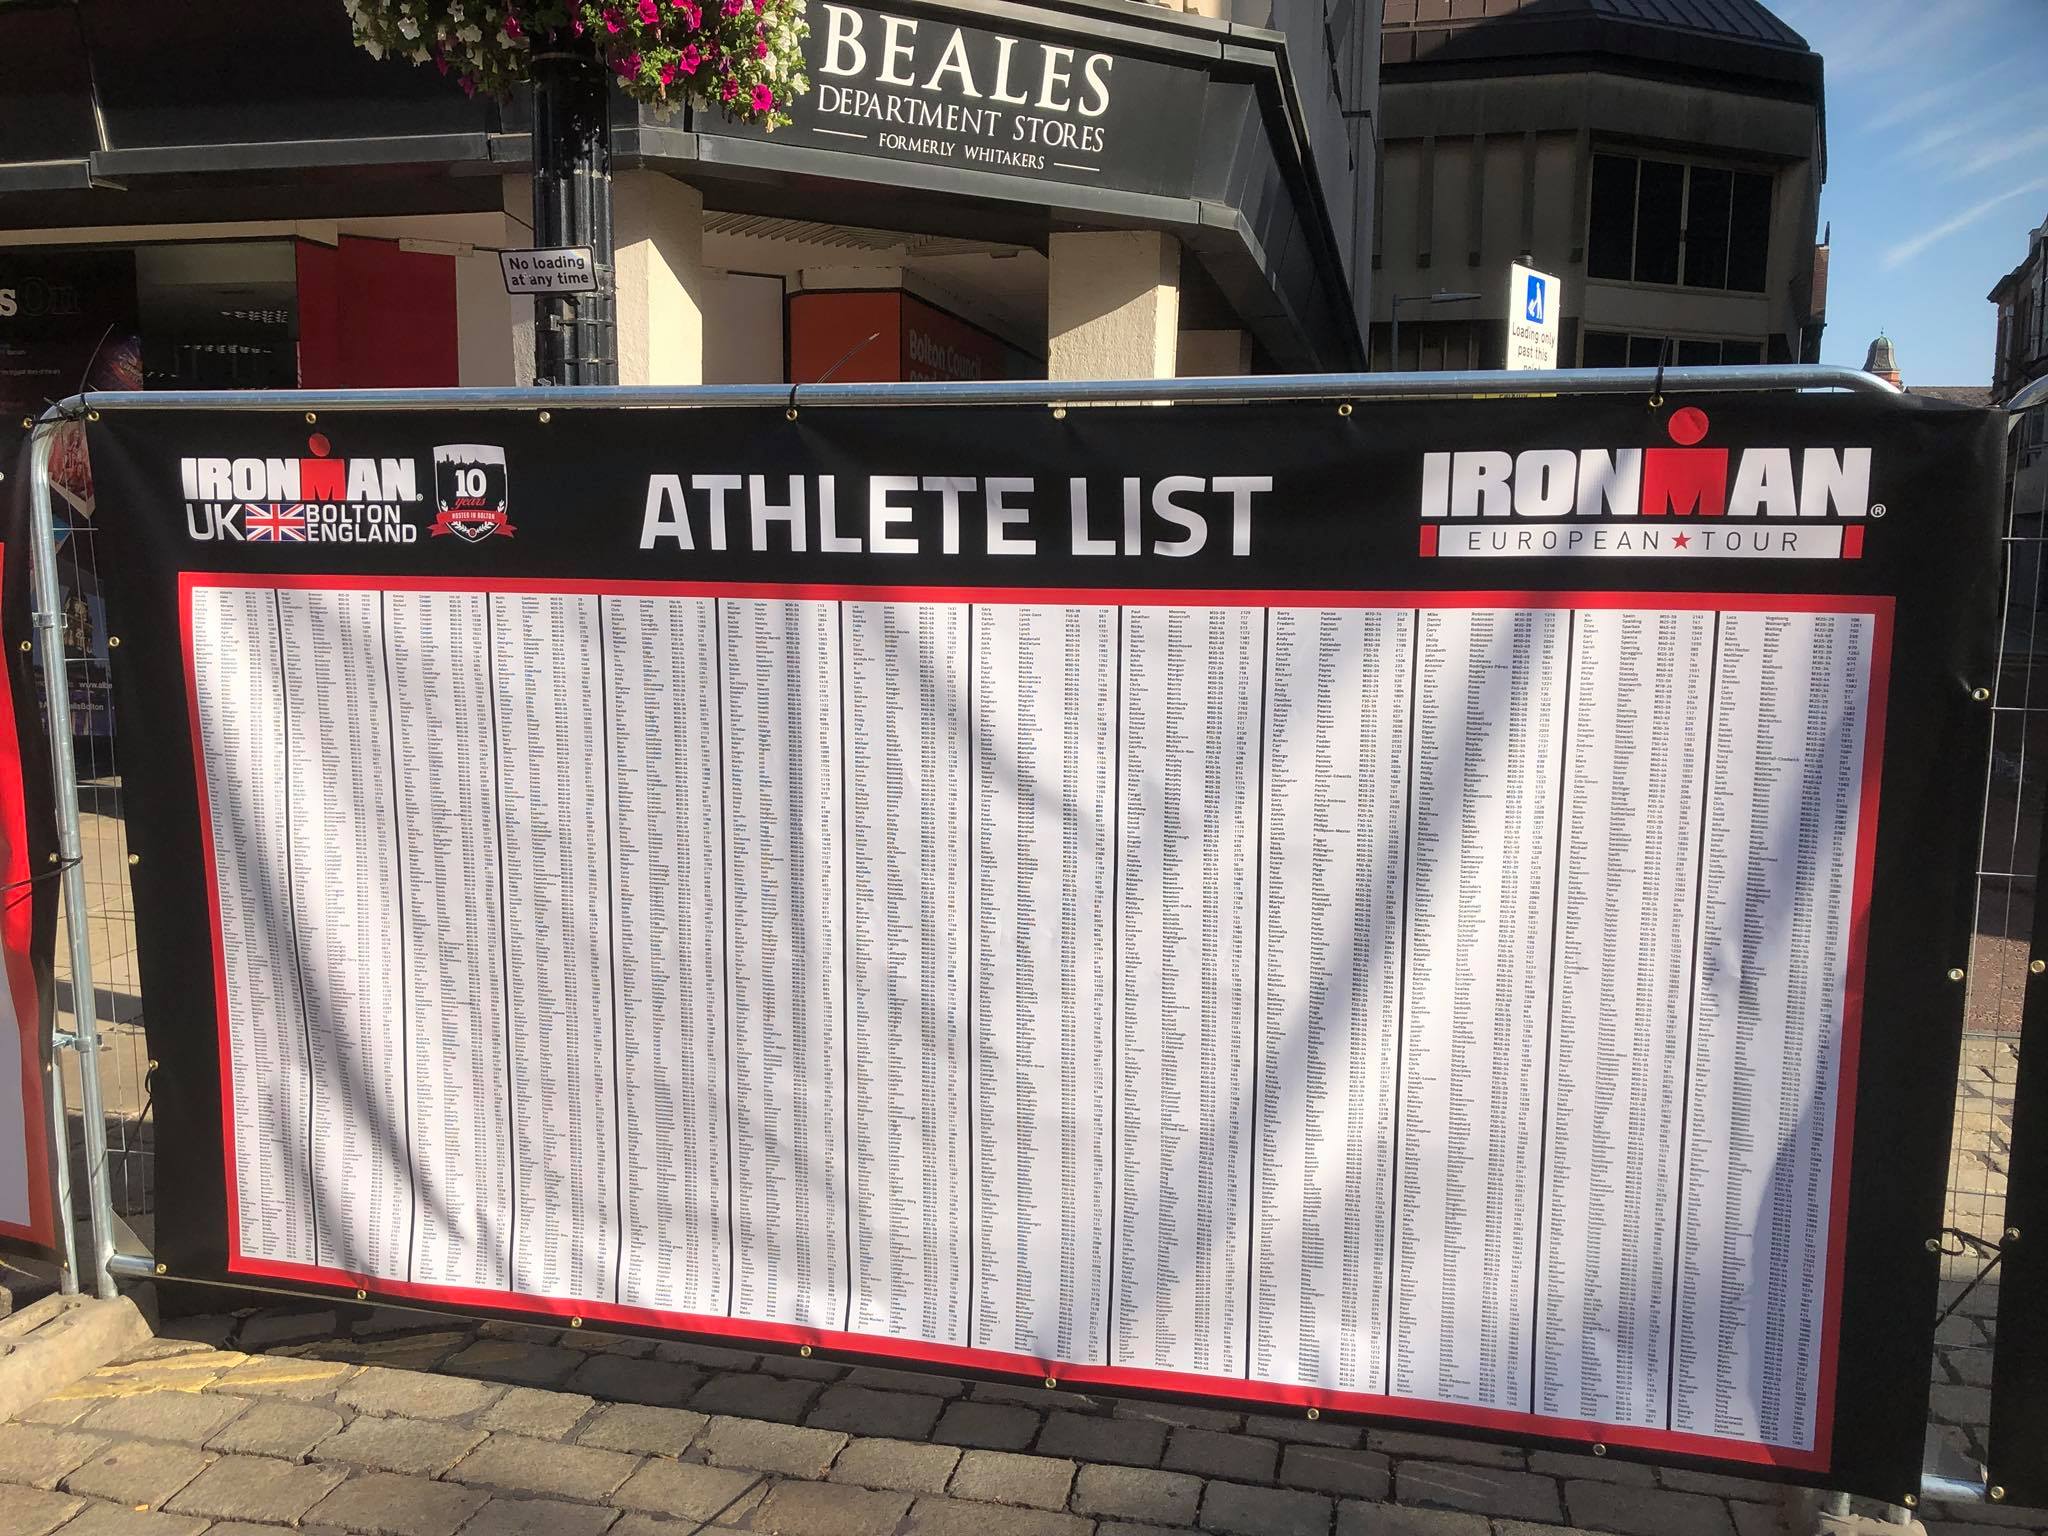 Coach_Terry_Wilson_Pursuit_of_The_Perfect_Race_IRONMAN_Bolton_United_Kingdom_Kevin_Nuun_Transition_rack_Bags_Names.jpg